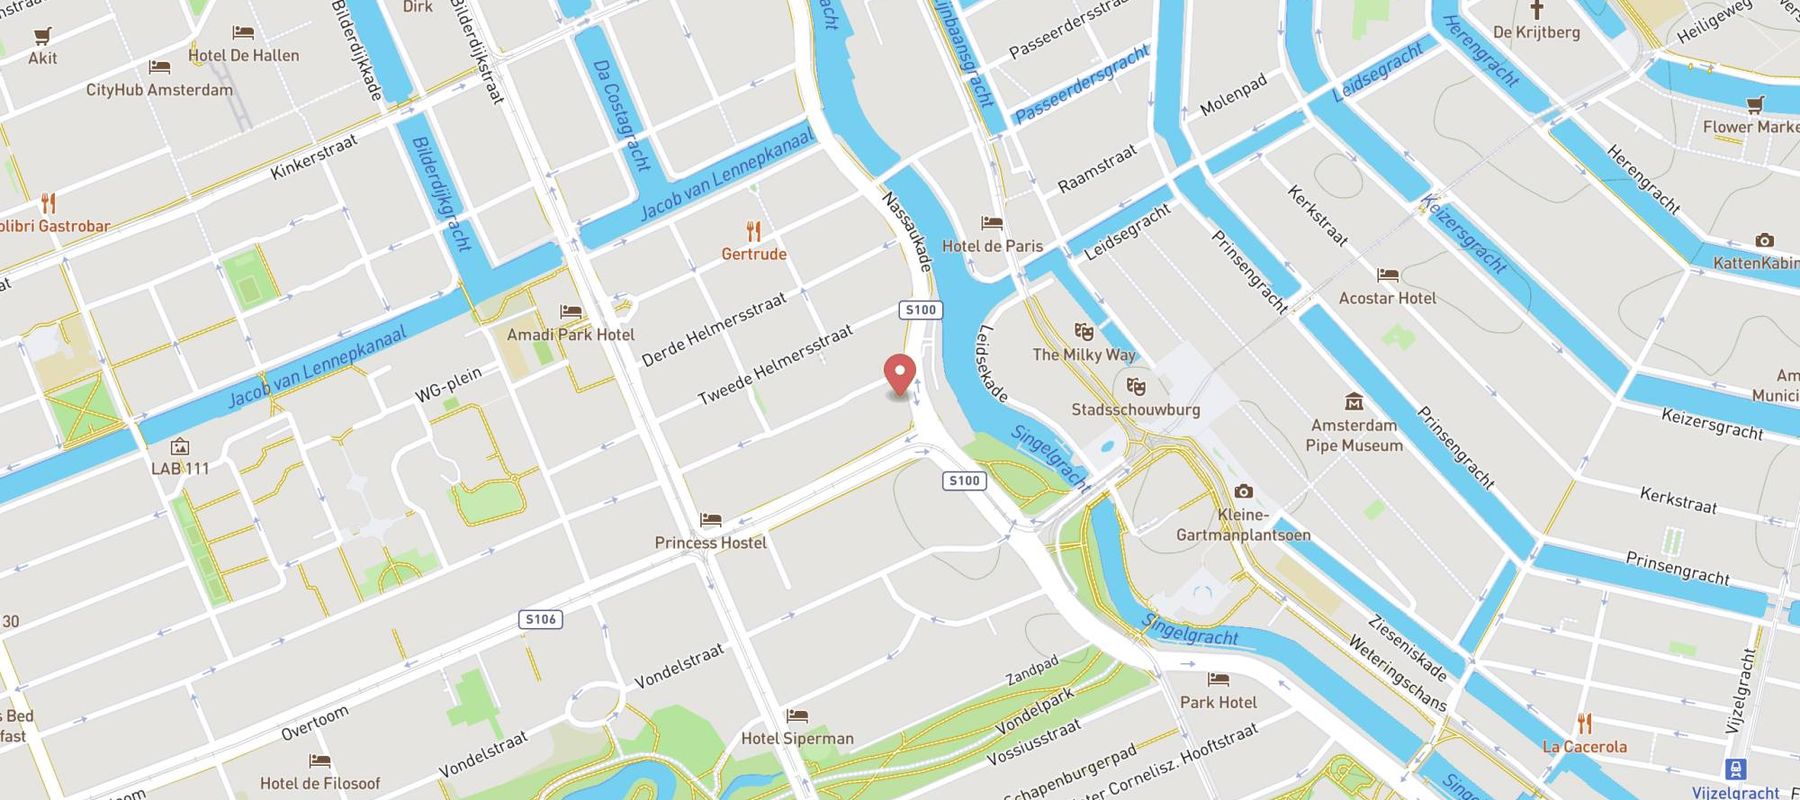 The ED Amsterdam map